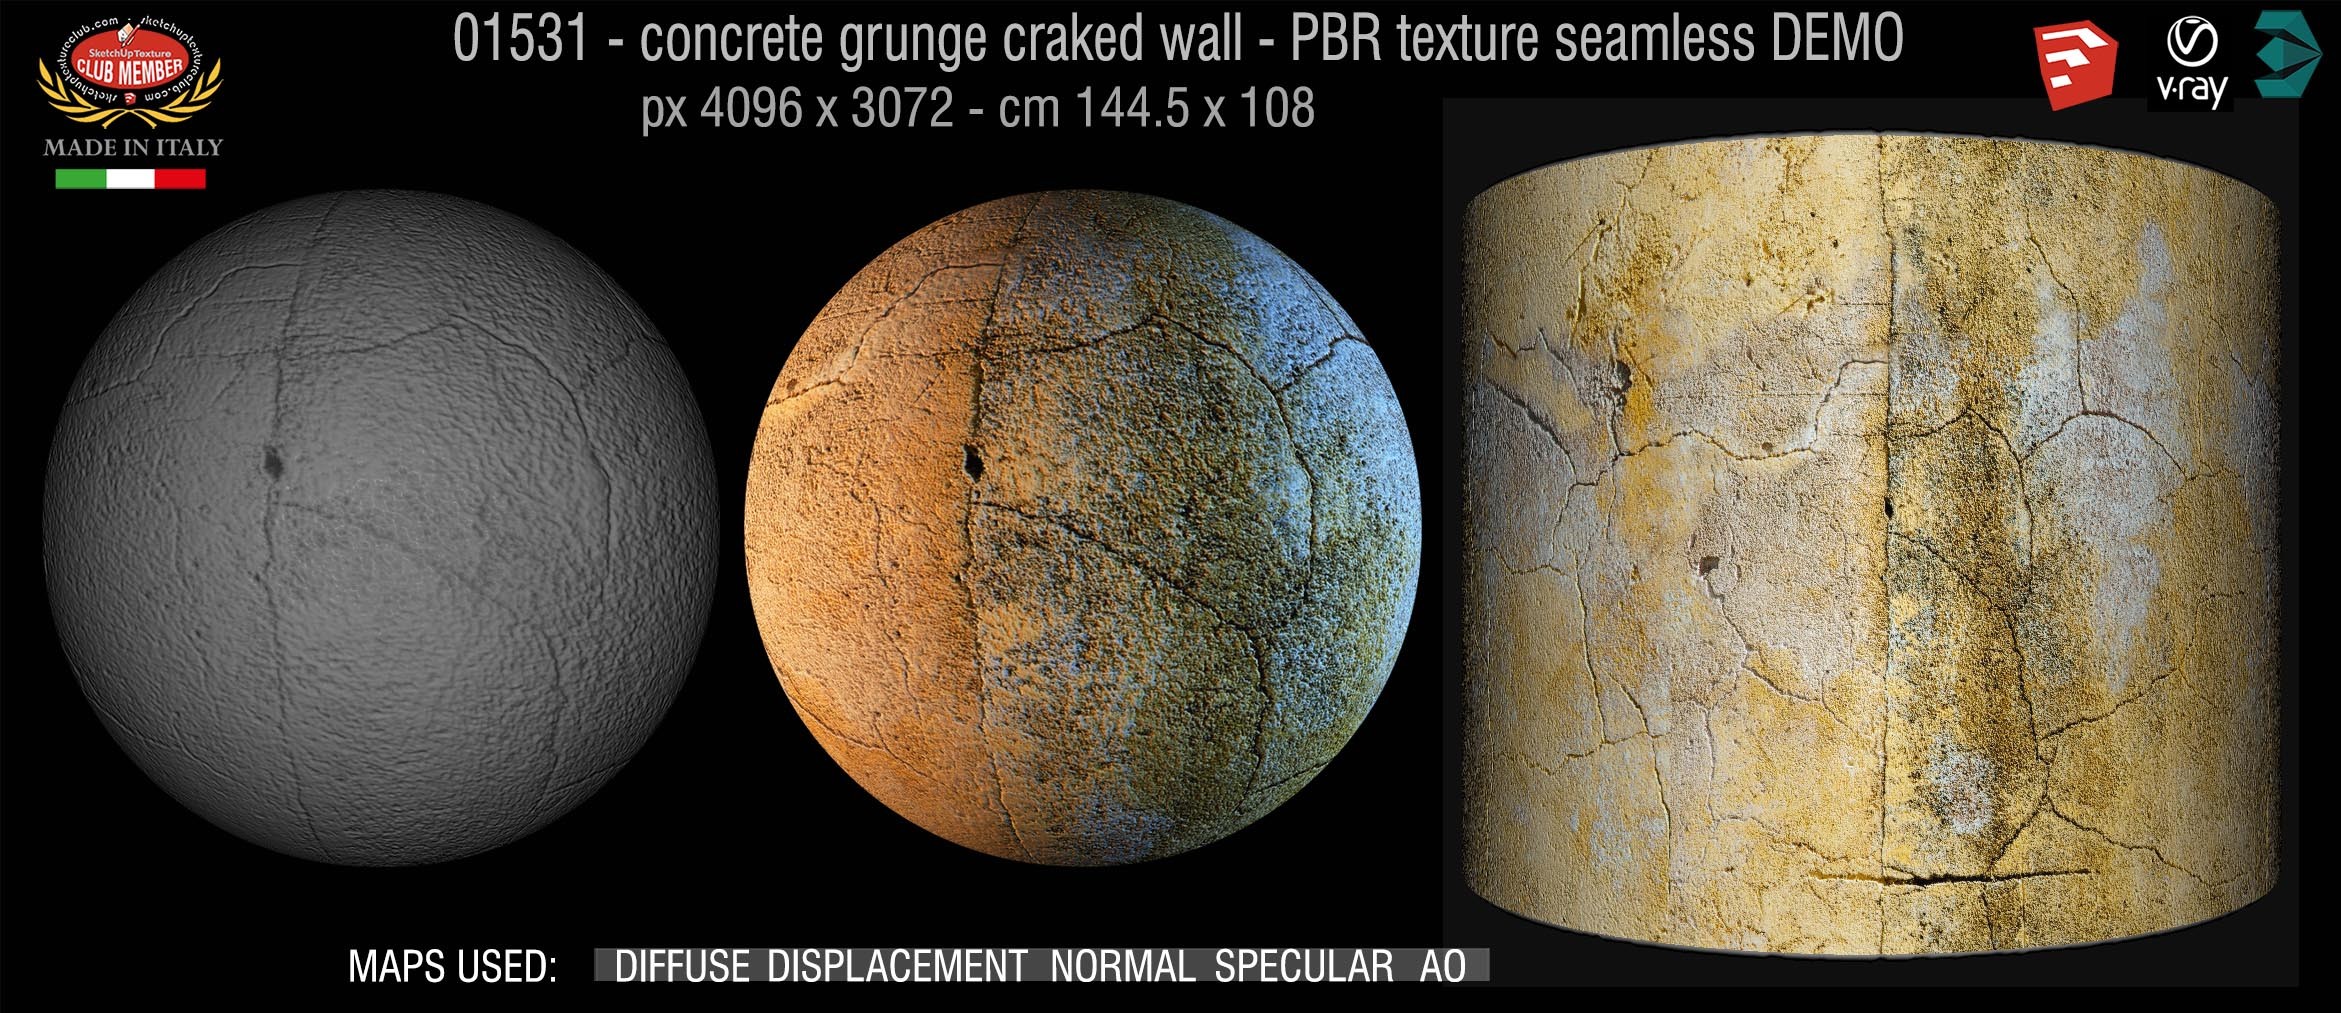 01531 concrete grunge craked wall PBR texture seamless DEMO